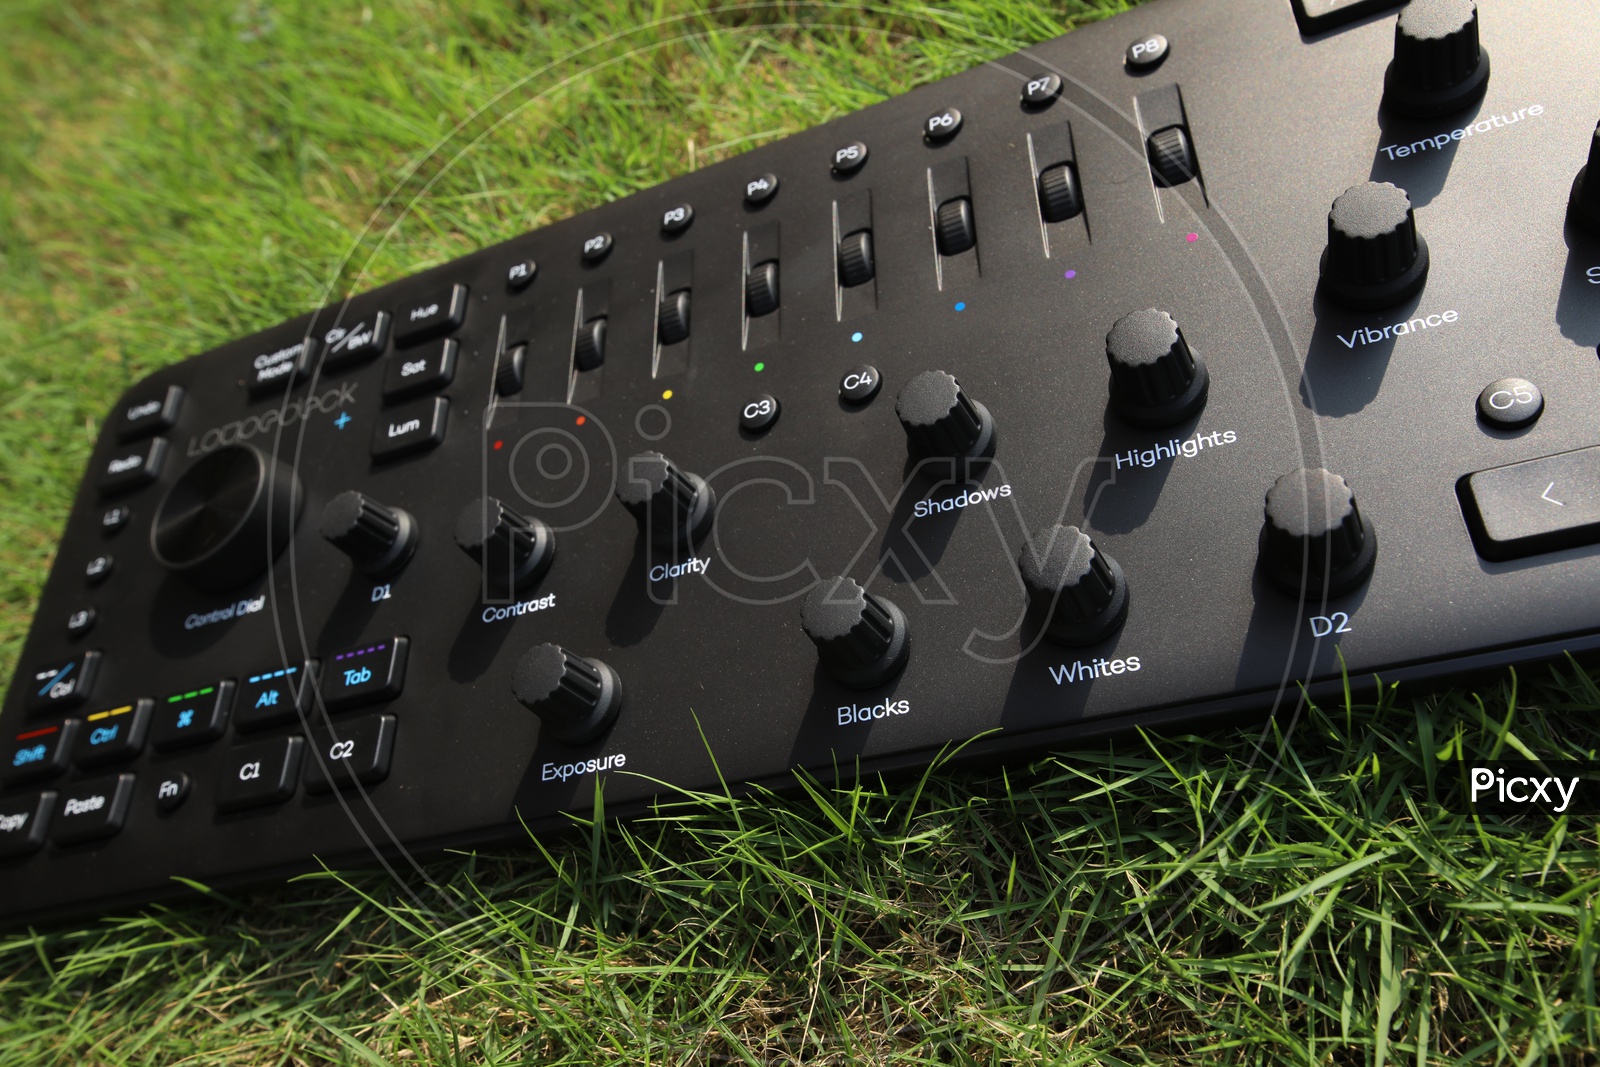 Loupedeck+ Plus Photo and Video Editing Console and Keyboard for Adobe Lightroom